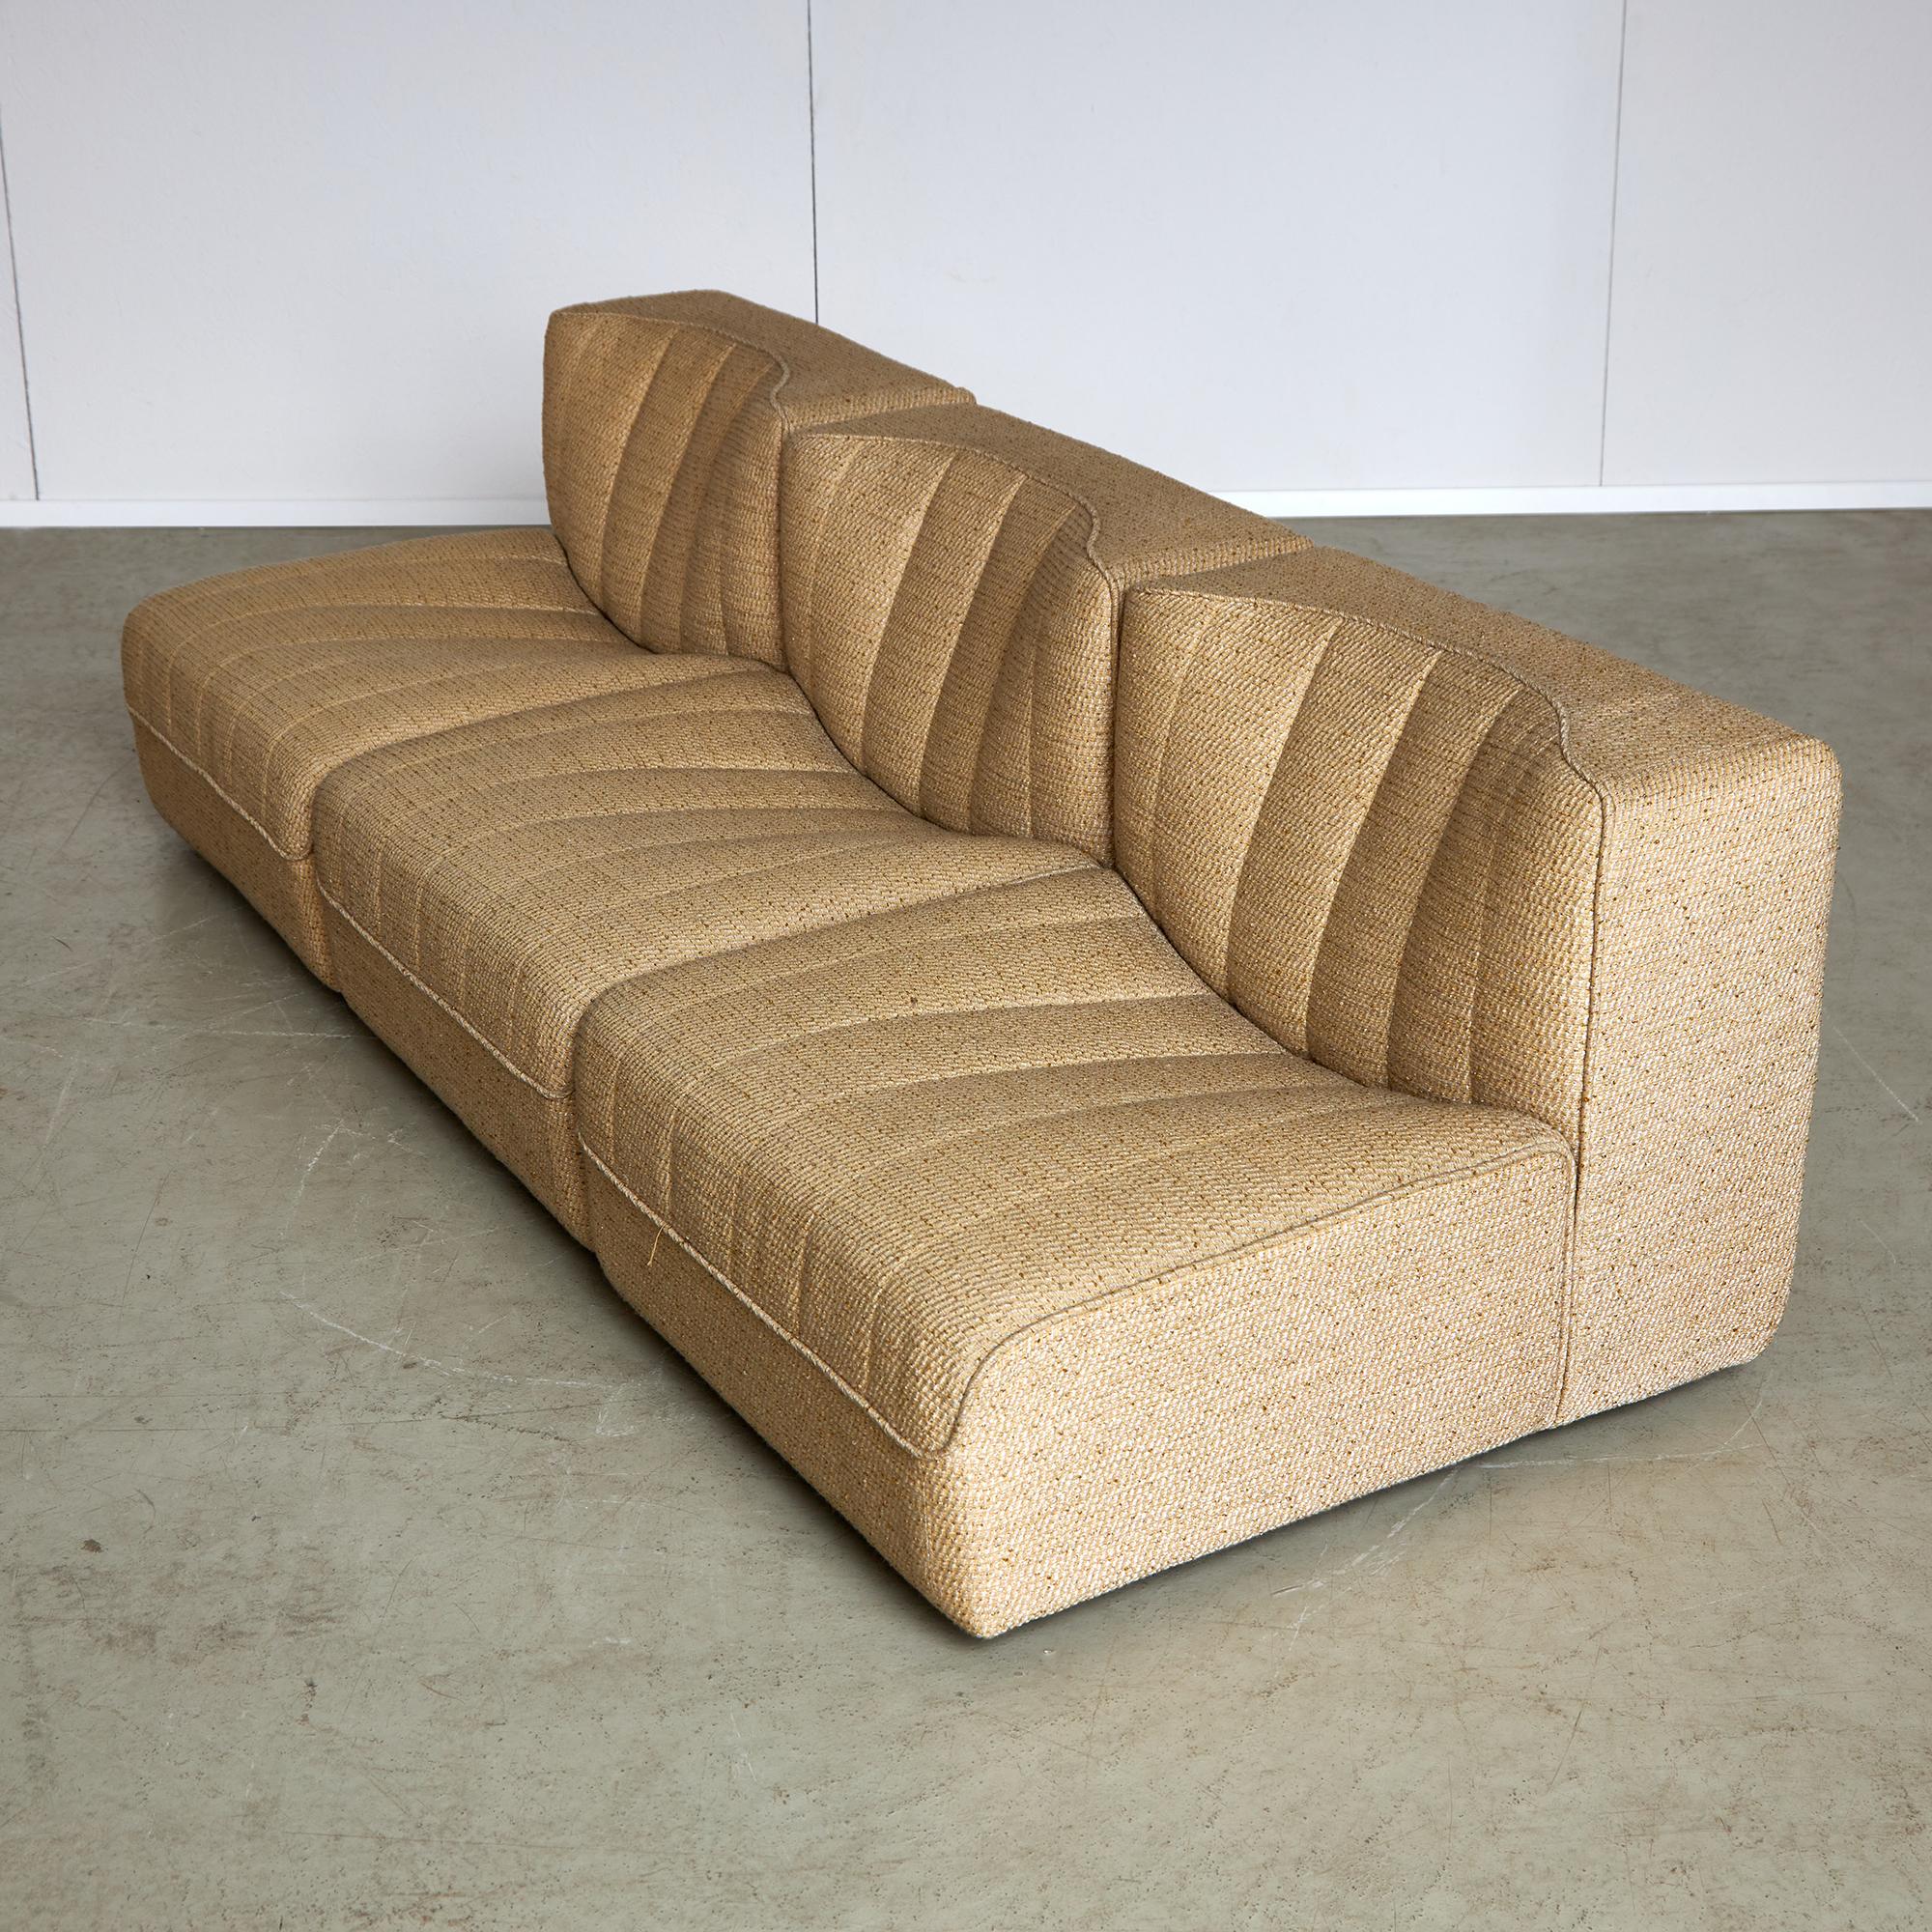 The Model 9000 was designed by Tito Agnoli for Artflex during the 1970s. A true masterpiece in modular sofa design. With its sleek and contemporary aesthetic, this set allows for endless possibilities, giving you the freedom to create a customized